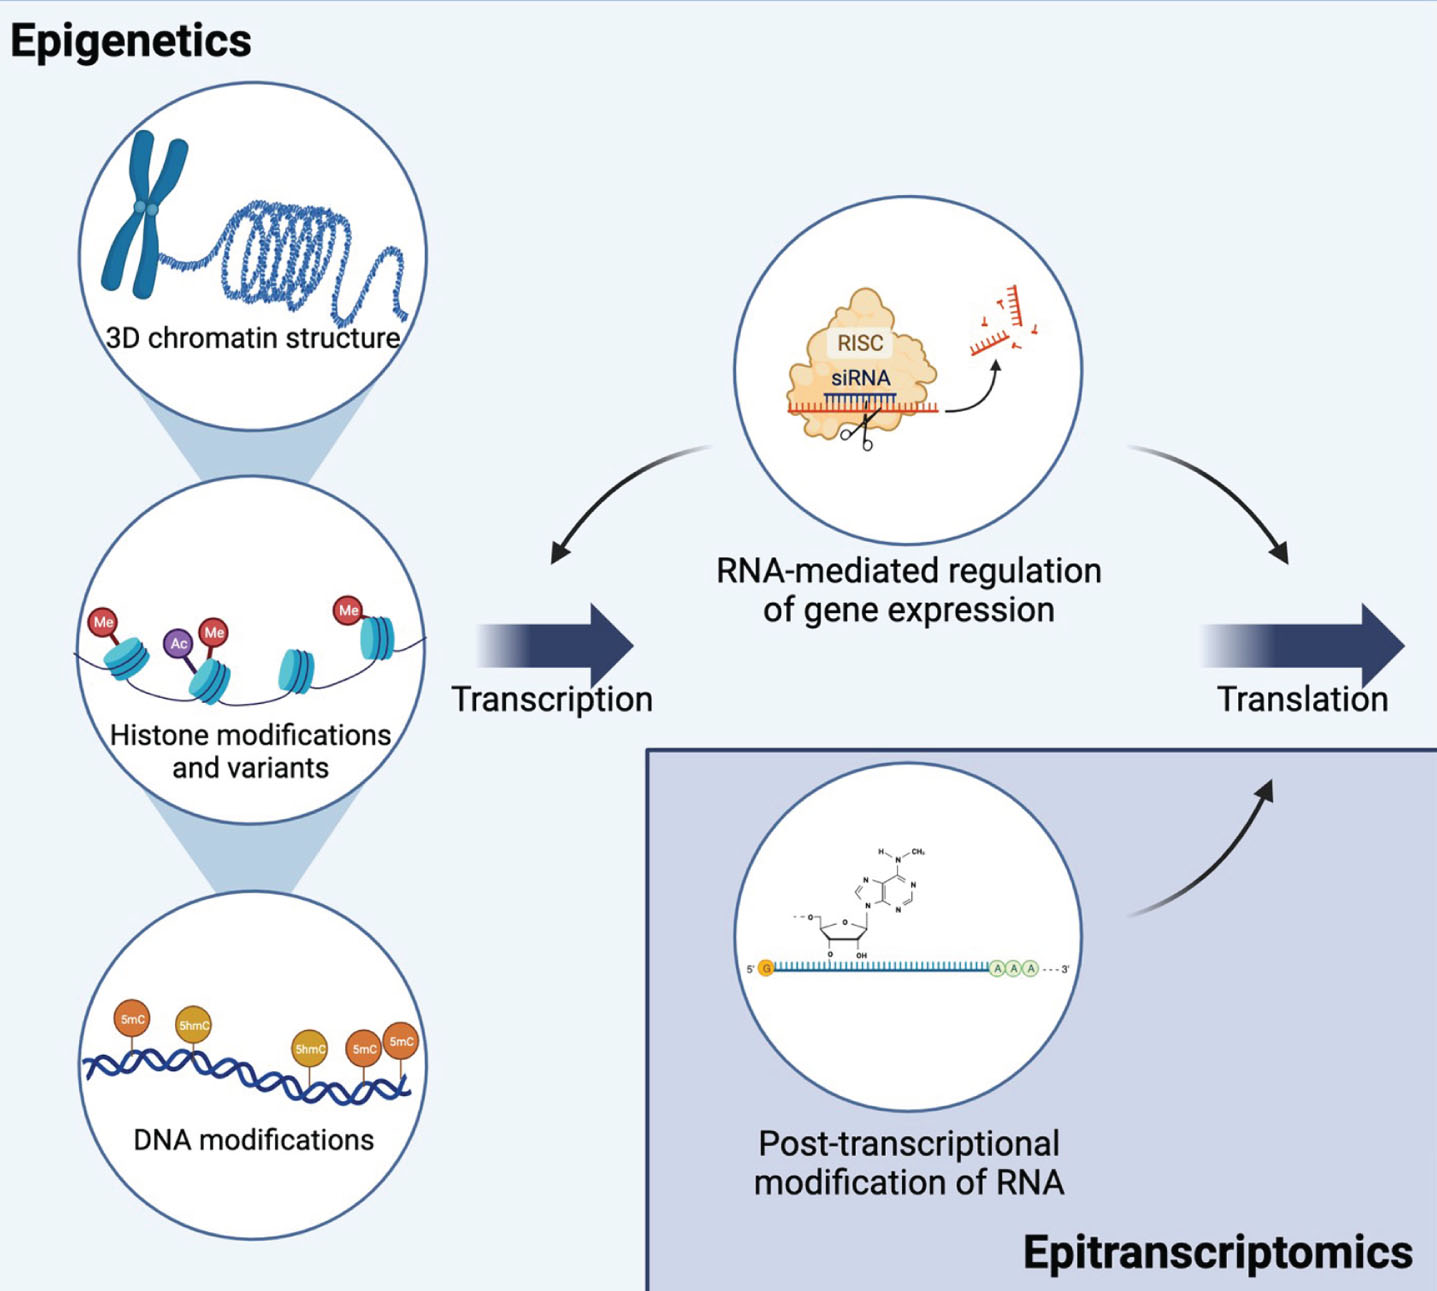 Epigenetic and epitranscriptomic mechanisms interact to regulate gene expression and translation. Epigenetic mechanisms include mechanisms at the DNA level that regulate transcription: 3D chromatin structure, histone modifications and variants, and DNA modifications. Multiple types of non-coding RNAs regulate both transcription and translation. RNA interference is shown as an example of RNA-mediated gene silencing. Epitranscriptomic mechanisms include multiple types of RNA modifications on all types of RNA. The most common mRNA modification, N6-methyladenosine (m6A), is shown as an example. Together, these mechanisms allow for dynamic regulation of transcription and translation and are influenced by environmental exposures. Created with BioRender.com.